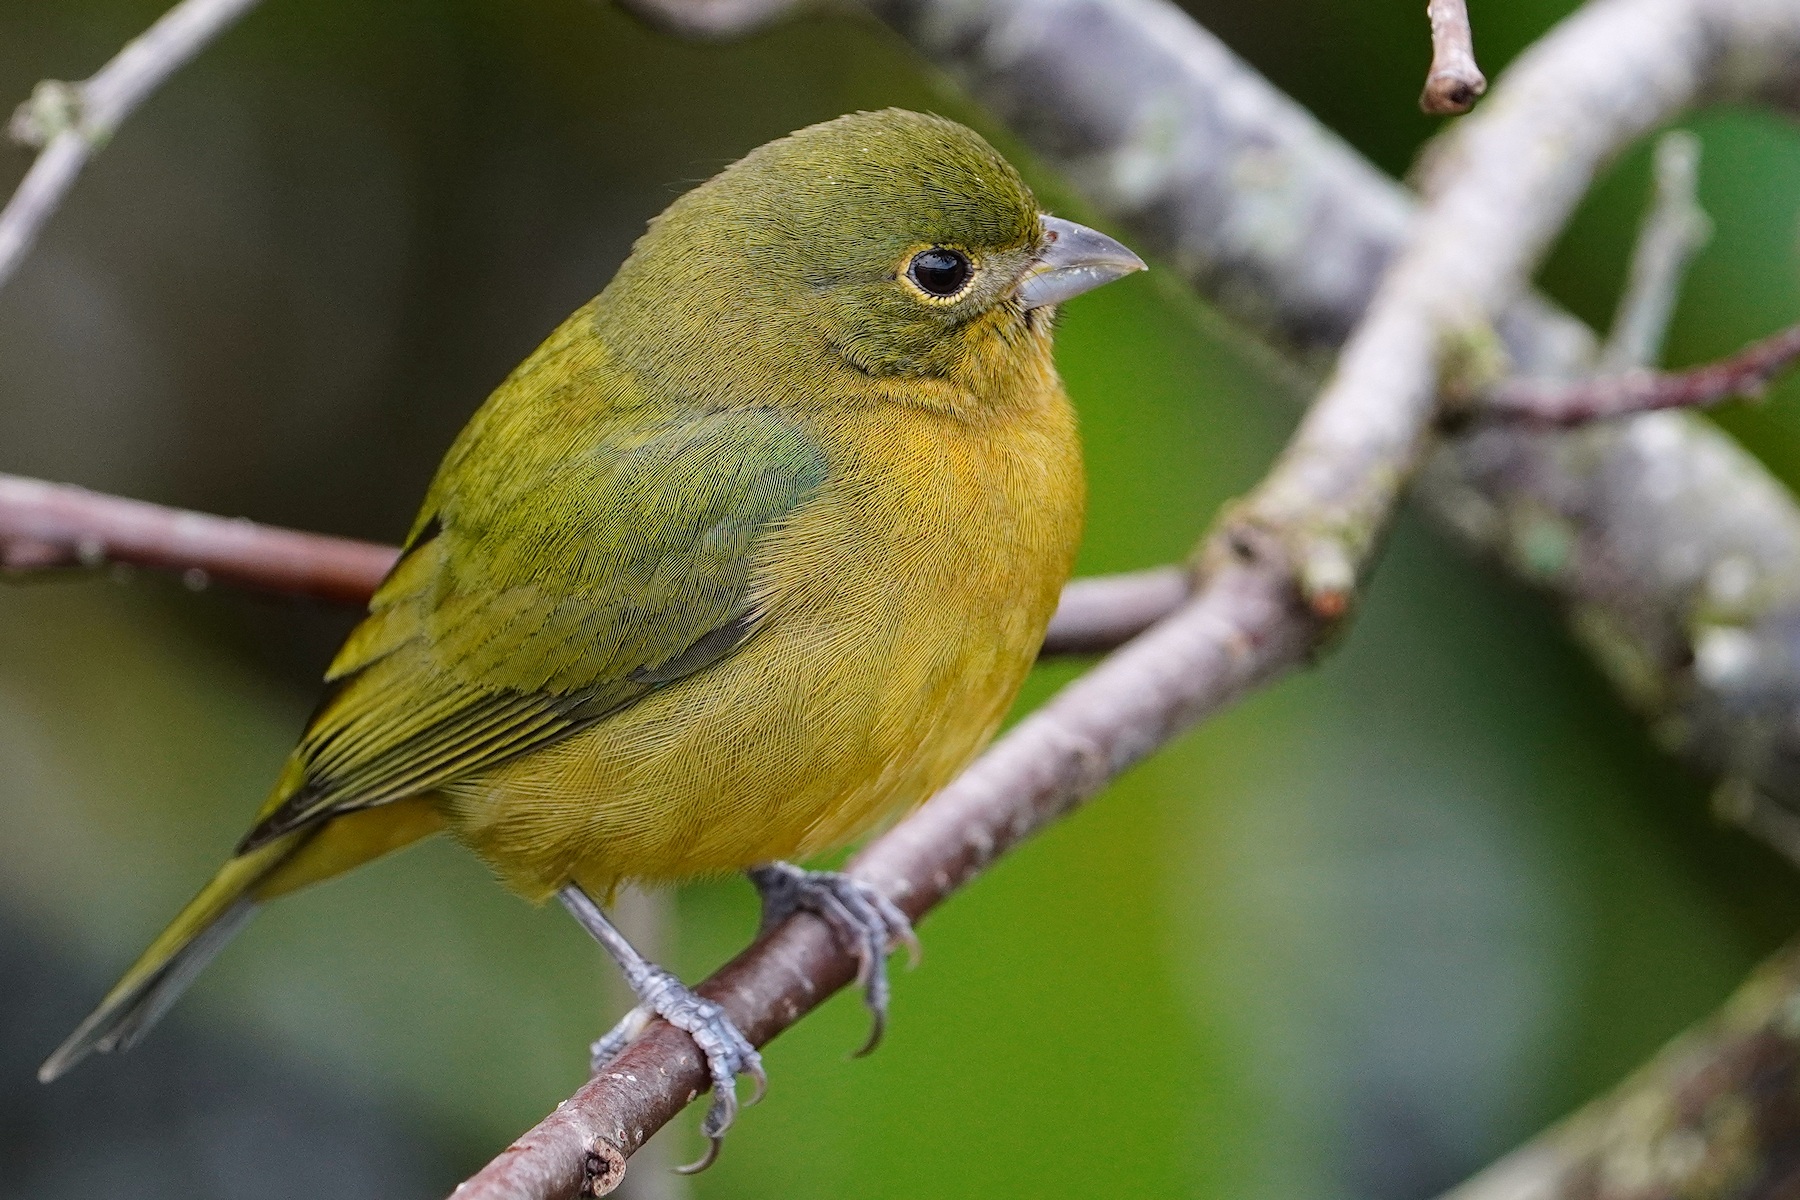 Painted bunting - female